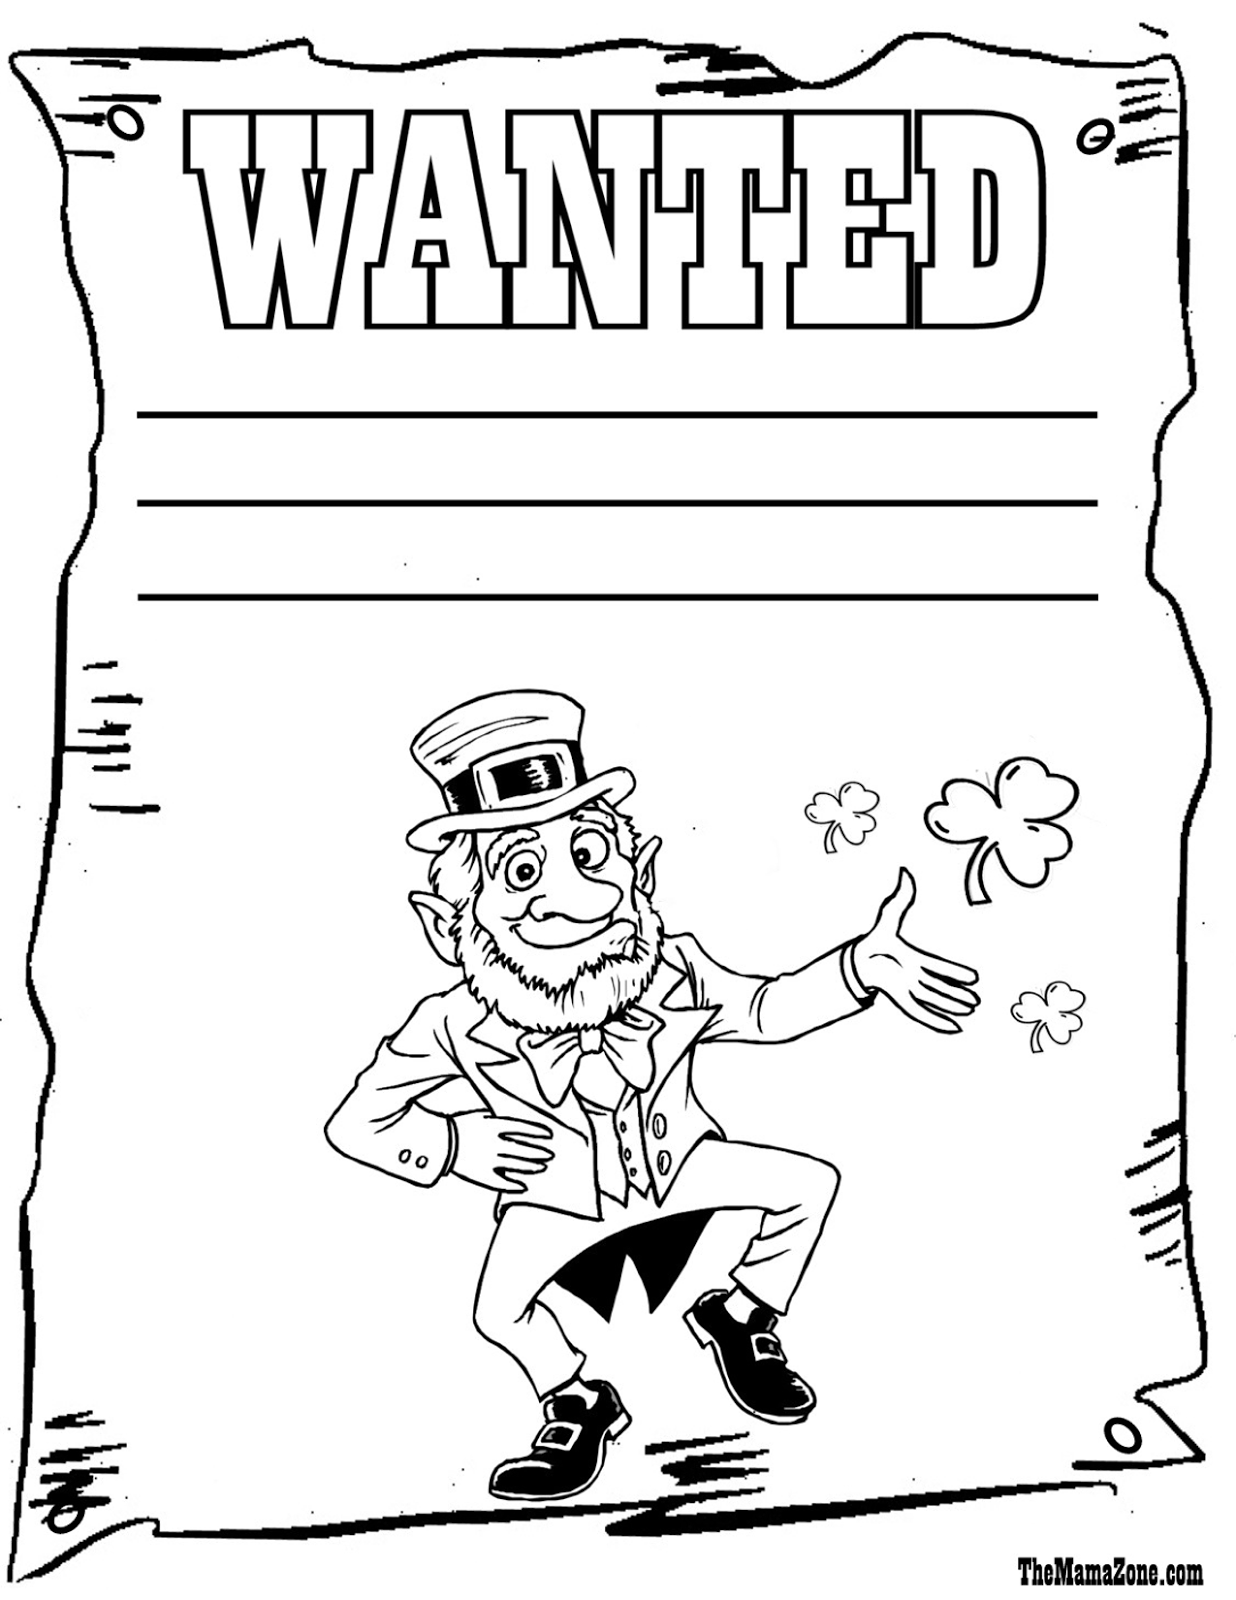 Leprechaun Wanted Coloring Page